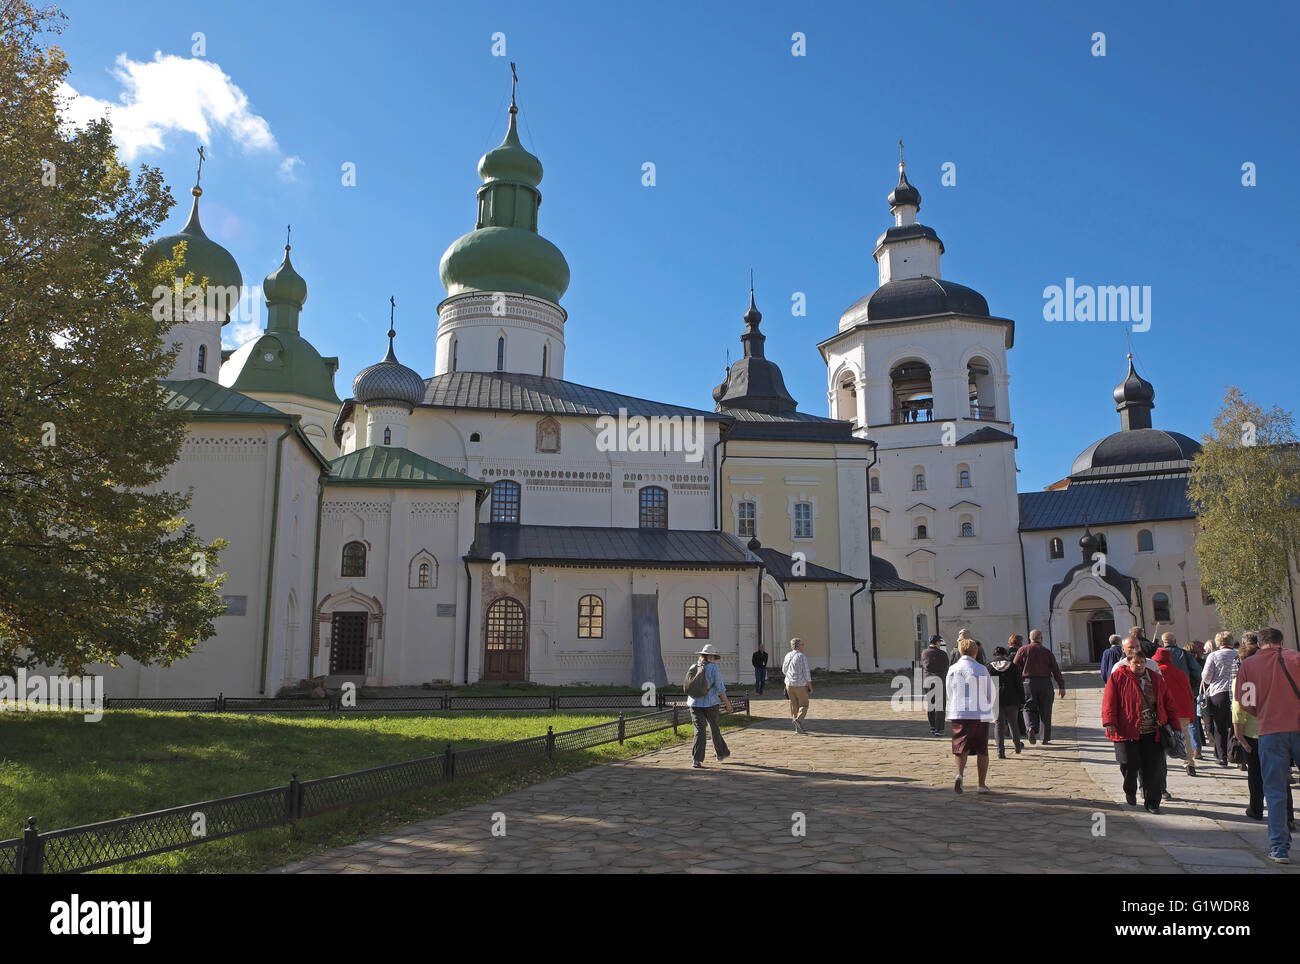 Monastery buildings seen from the Holy Gate, entrance to Kirillov-Belozersky Monastery, north of Vologda, Russia. Stock Photo